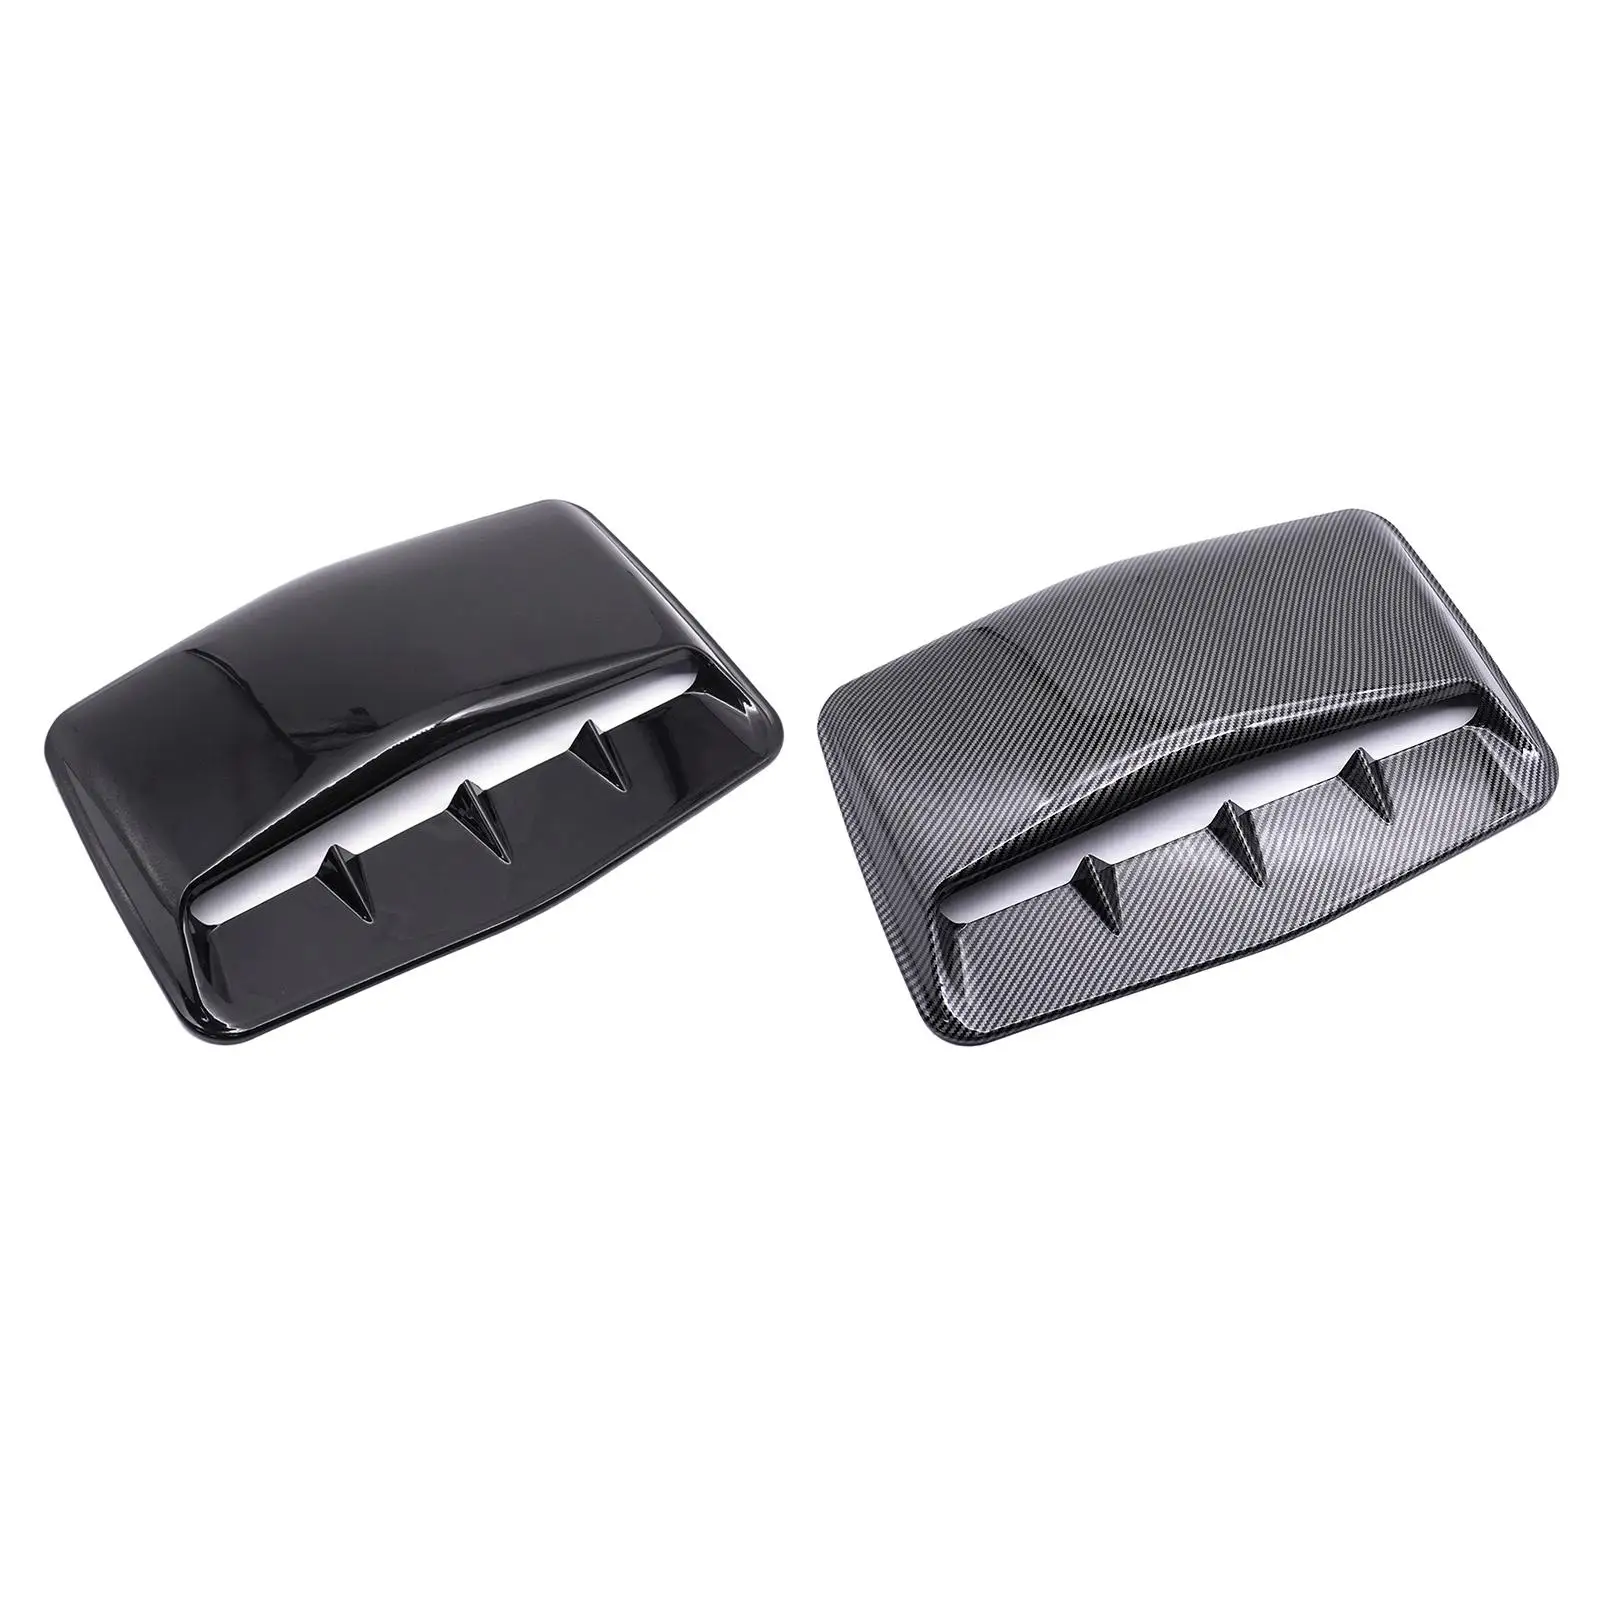    Intake Cover Bonnet Air Outlet  for Car Modification Accessories  Decoration